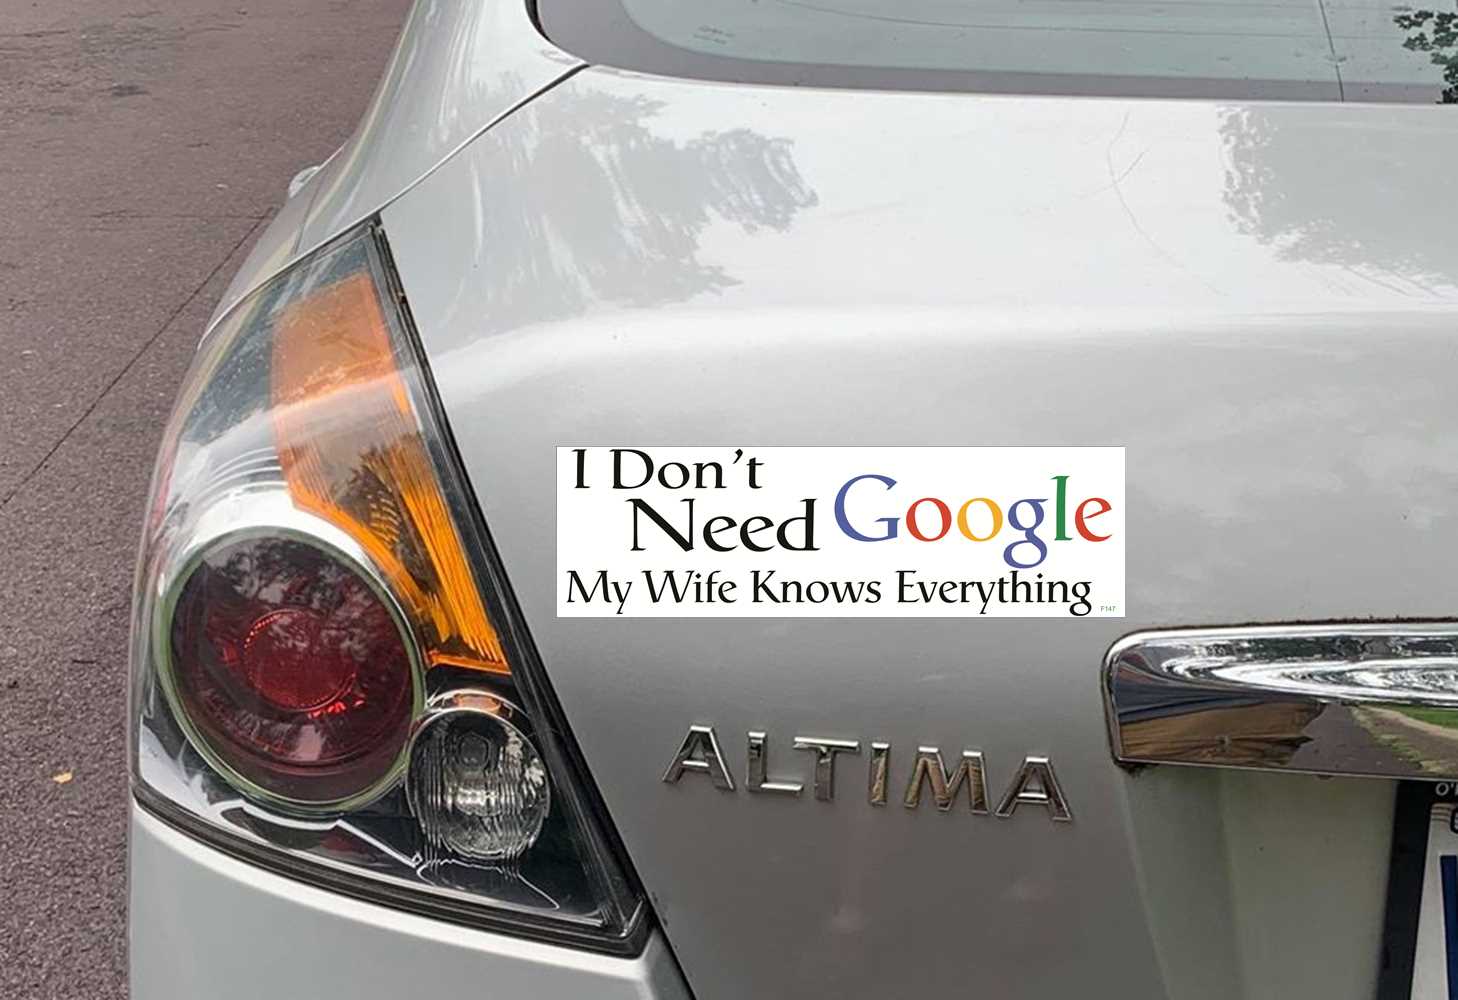 I DON’T NEED GOOGLE. MY WIFE KNOWS EVERYTHING - FUNNY CAR MAGNET on car